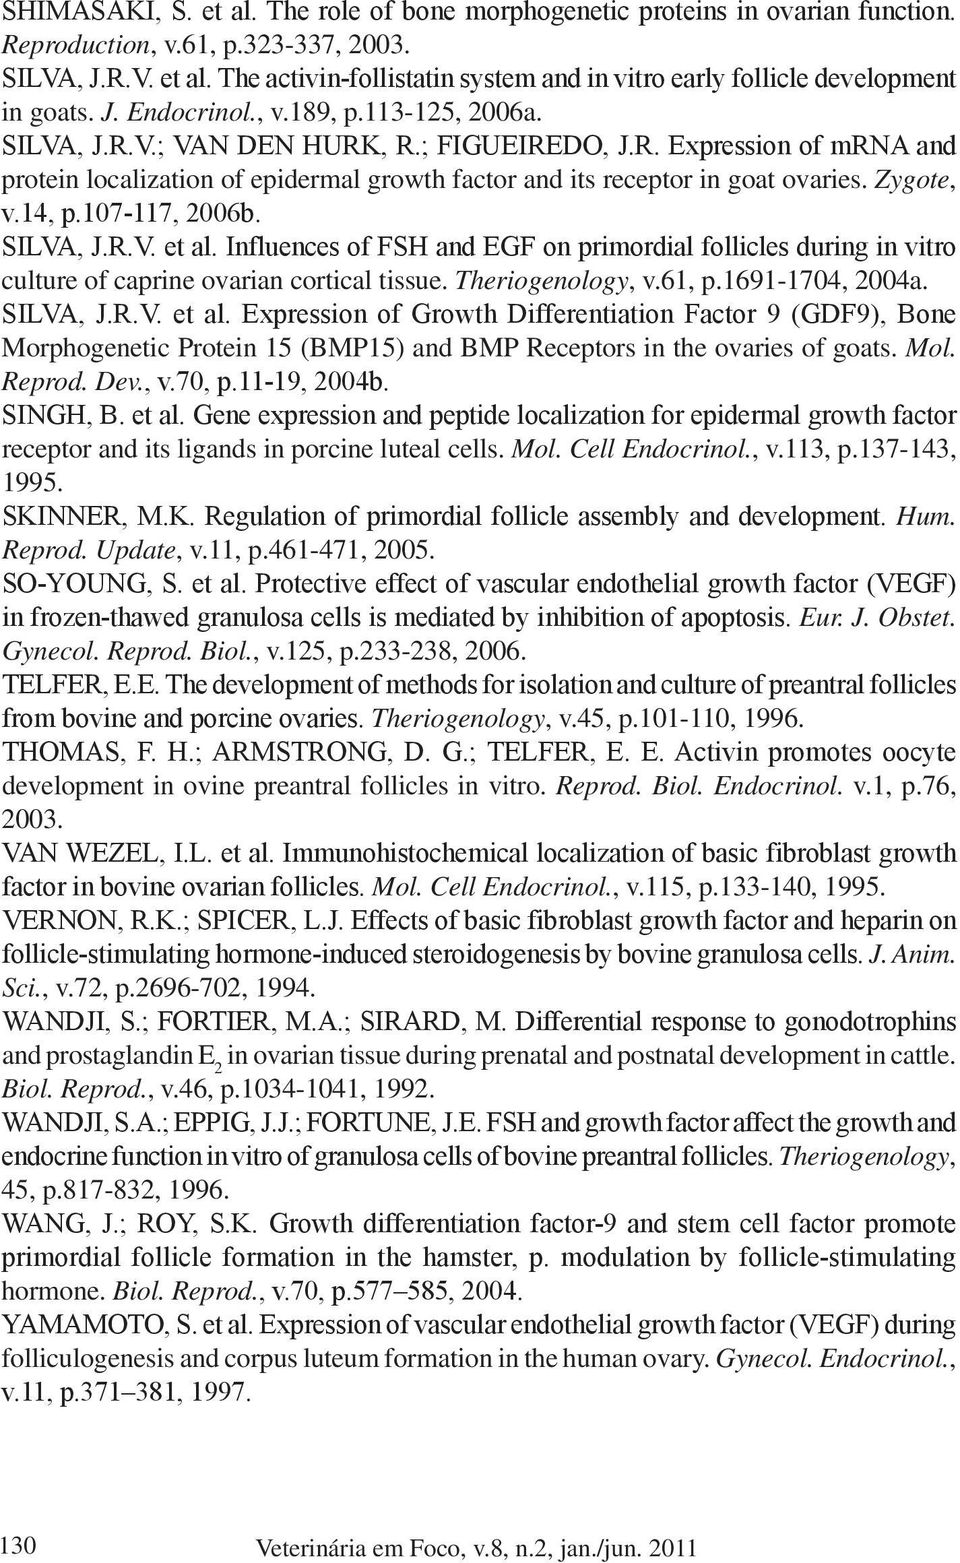 Zygote, v.14, p.107-117, 2006b. SILVA, J.R.V. et al. Influences of FSH and EGF on primordial follicles during in vitro culture of caprine ovarian cortical tissue. Theriogenology, v.61, p.